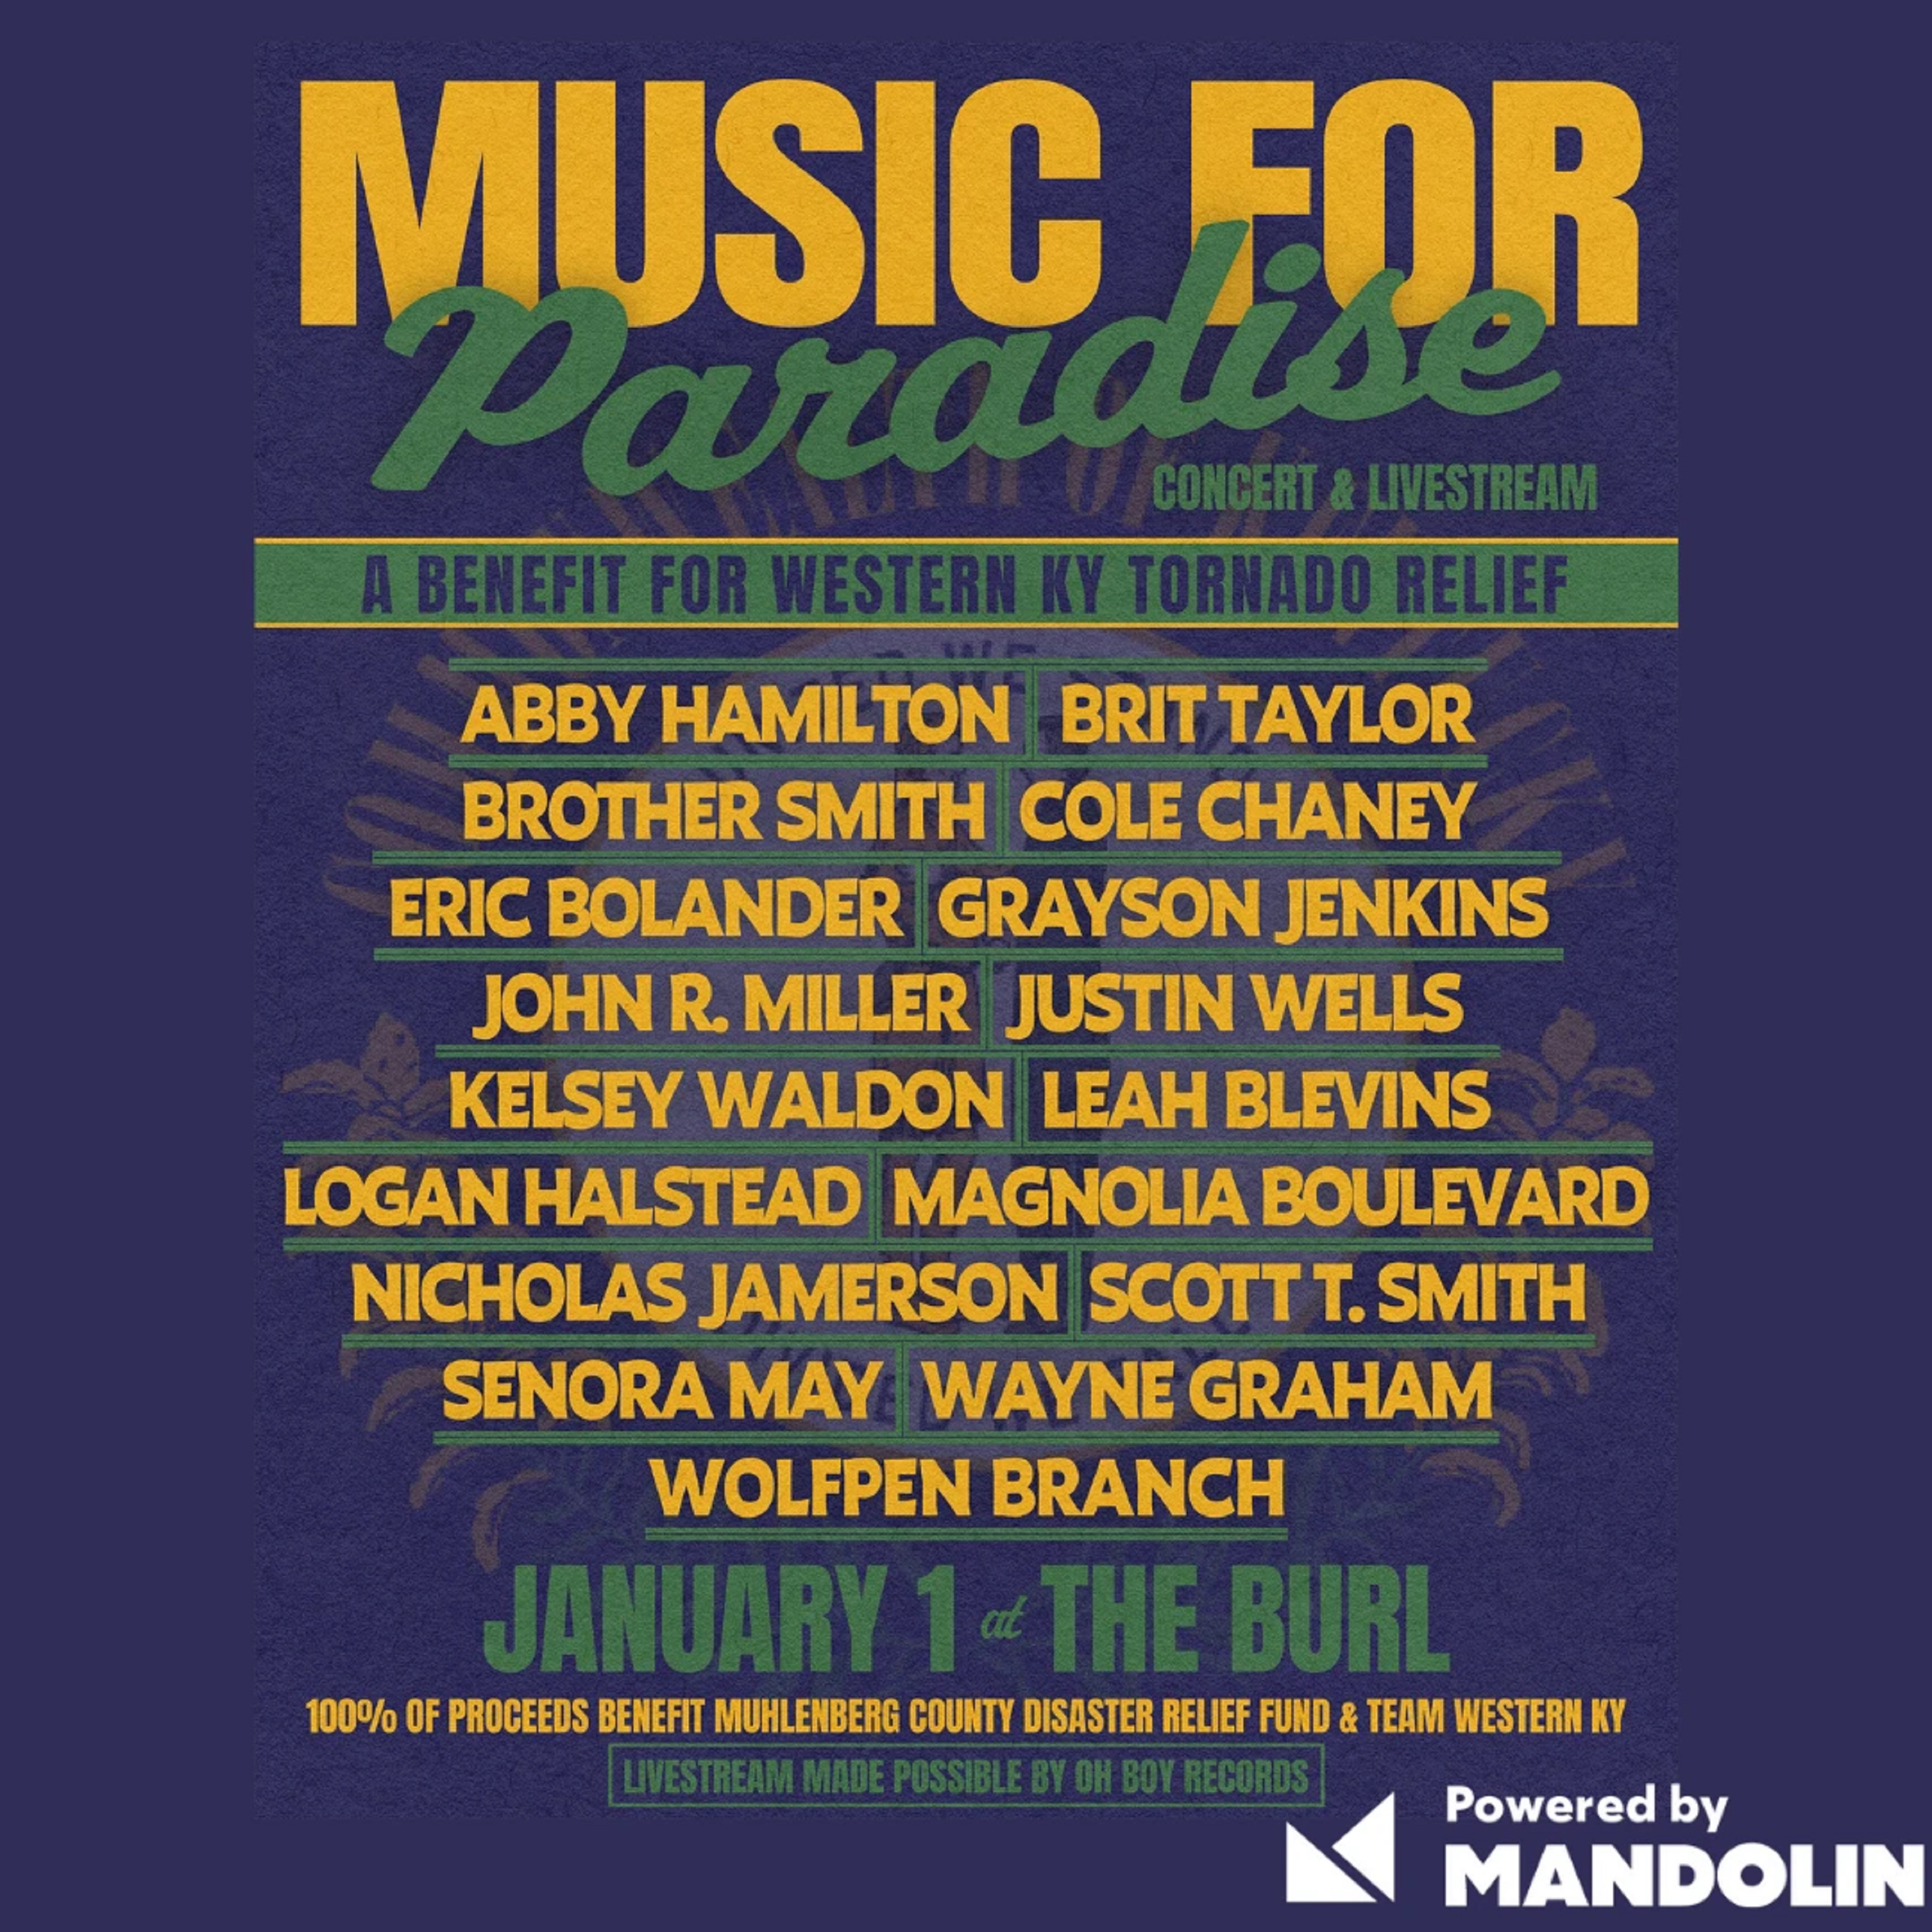 “Music For Paradise: A Benefit For Western KY Tornado Relief” concert confirmed for January 1